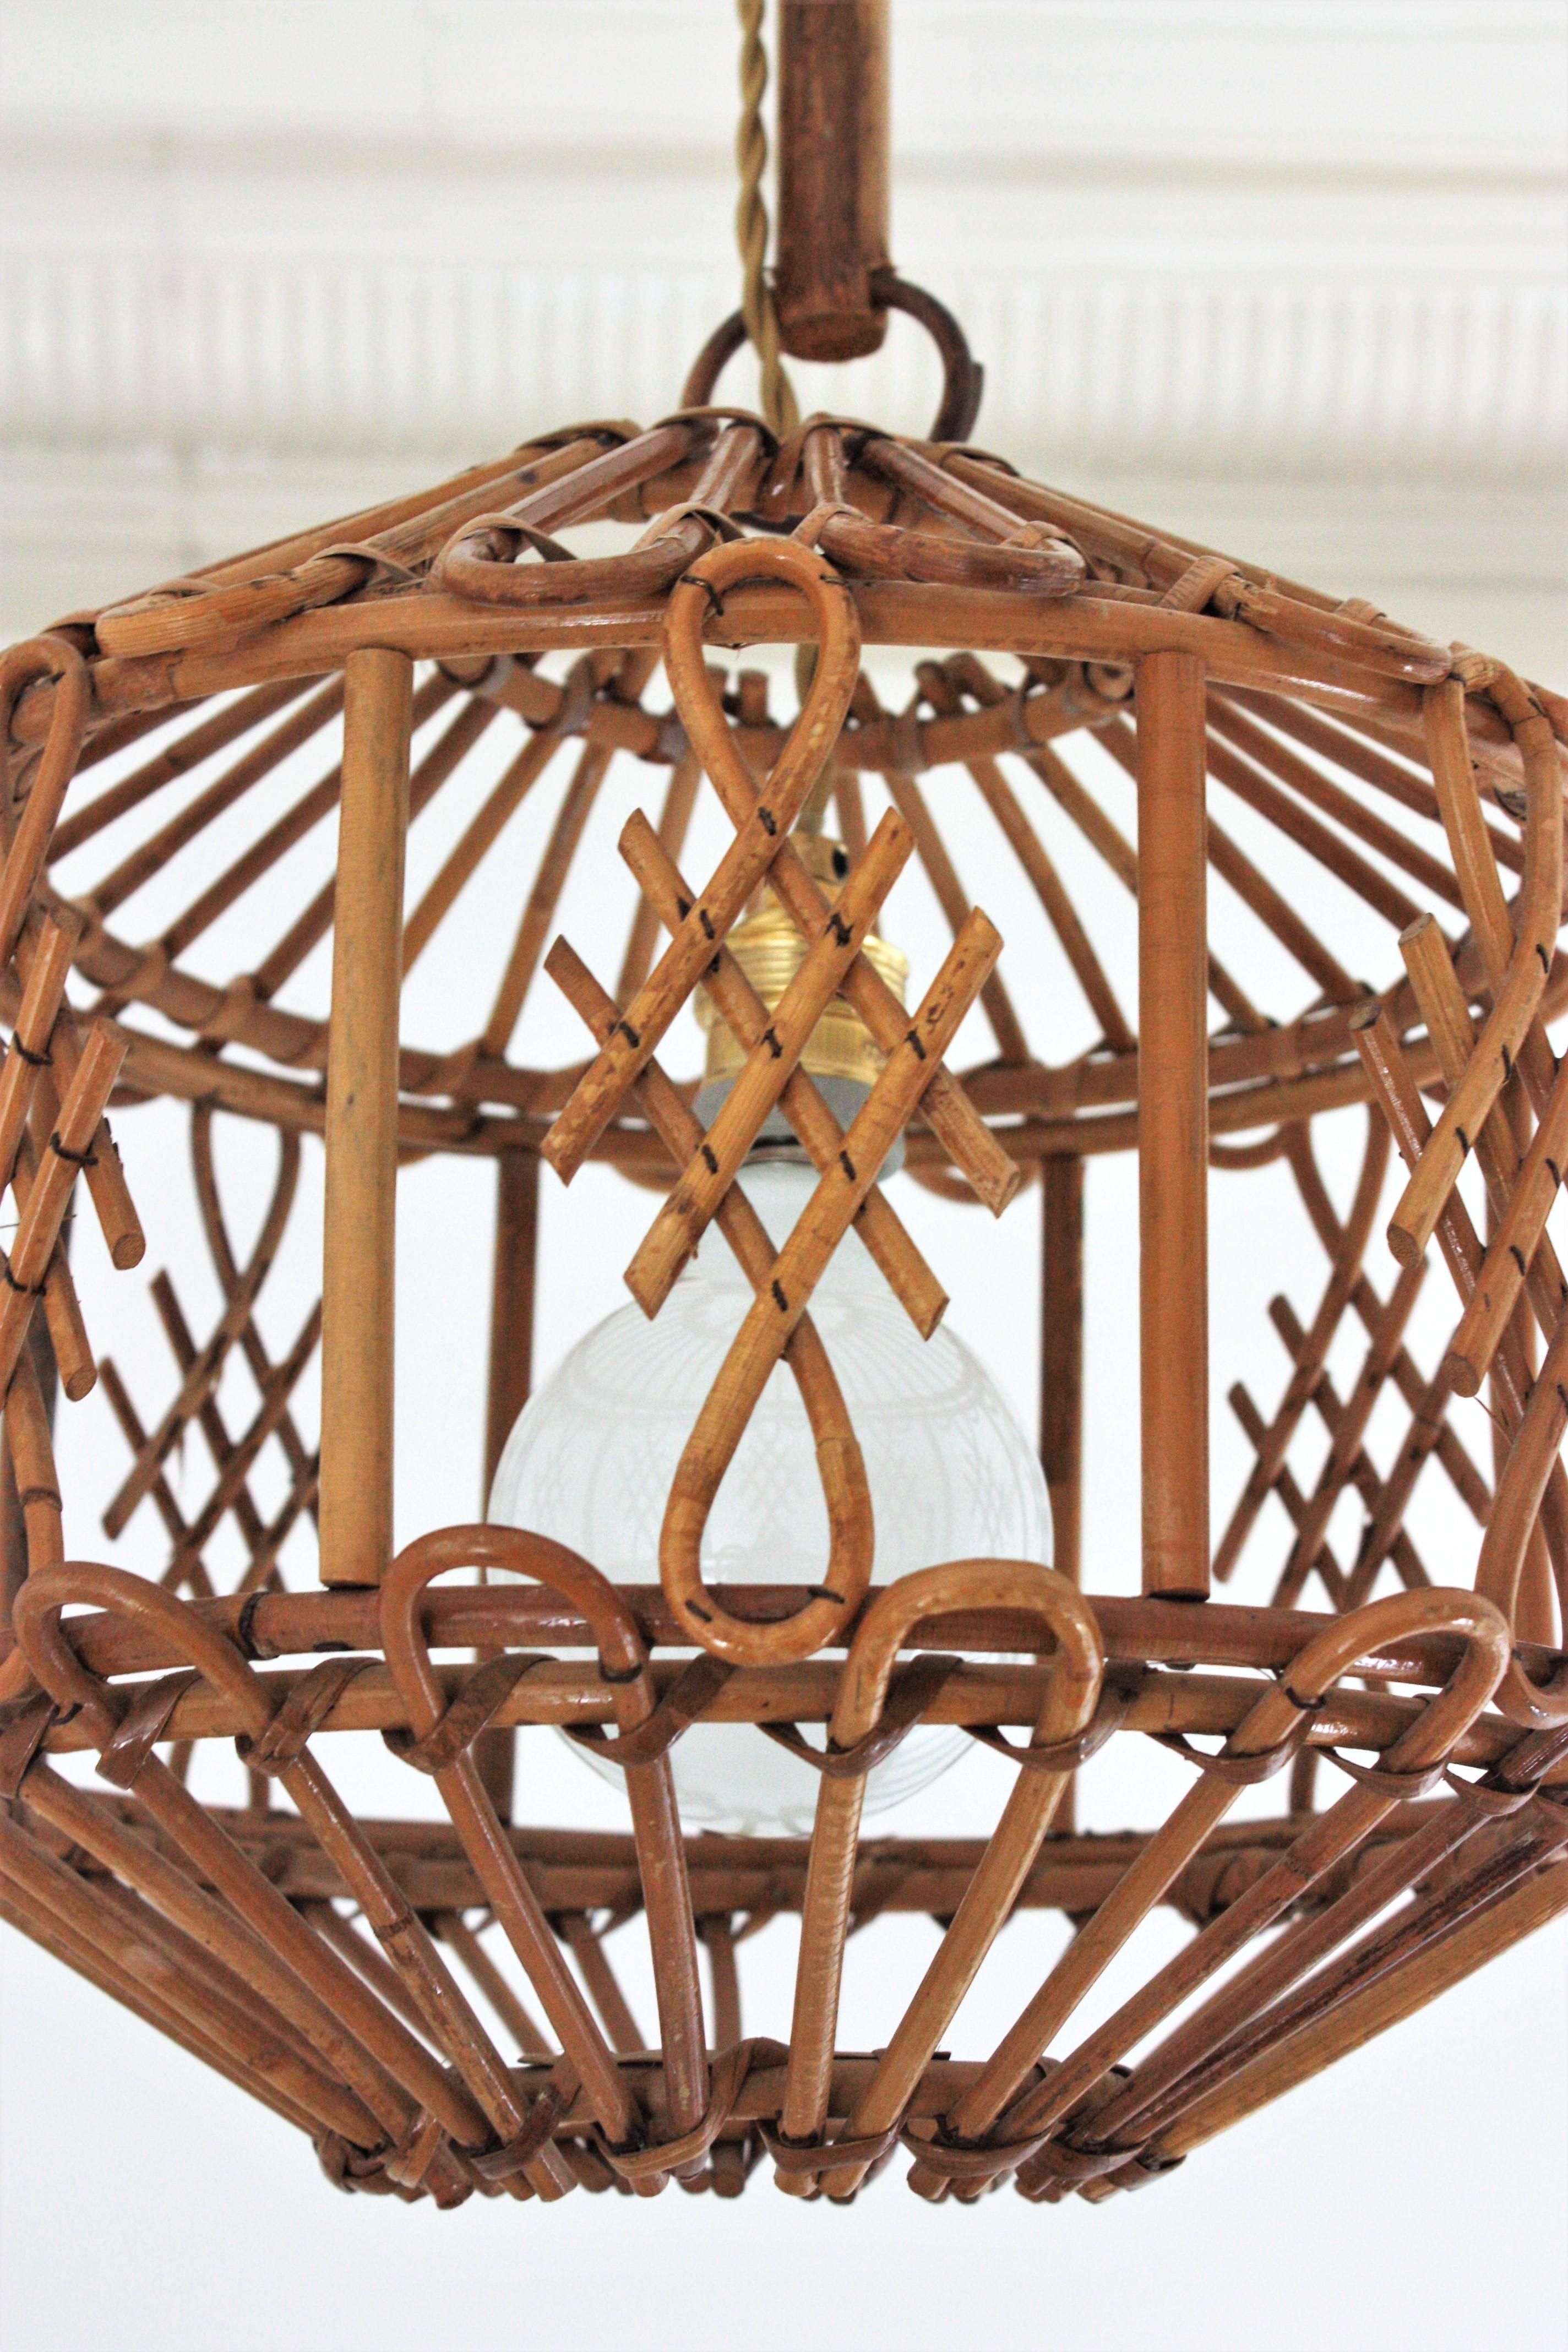 French Modernist Rattan Pendant Lantern / Hanging Light with Chinoiserie Accents 2